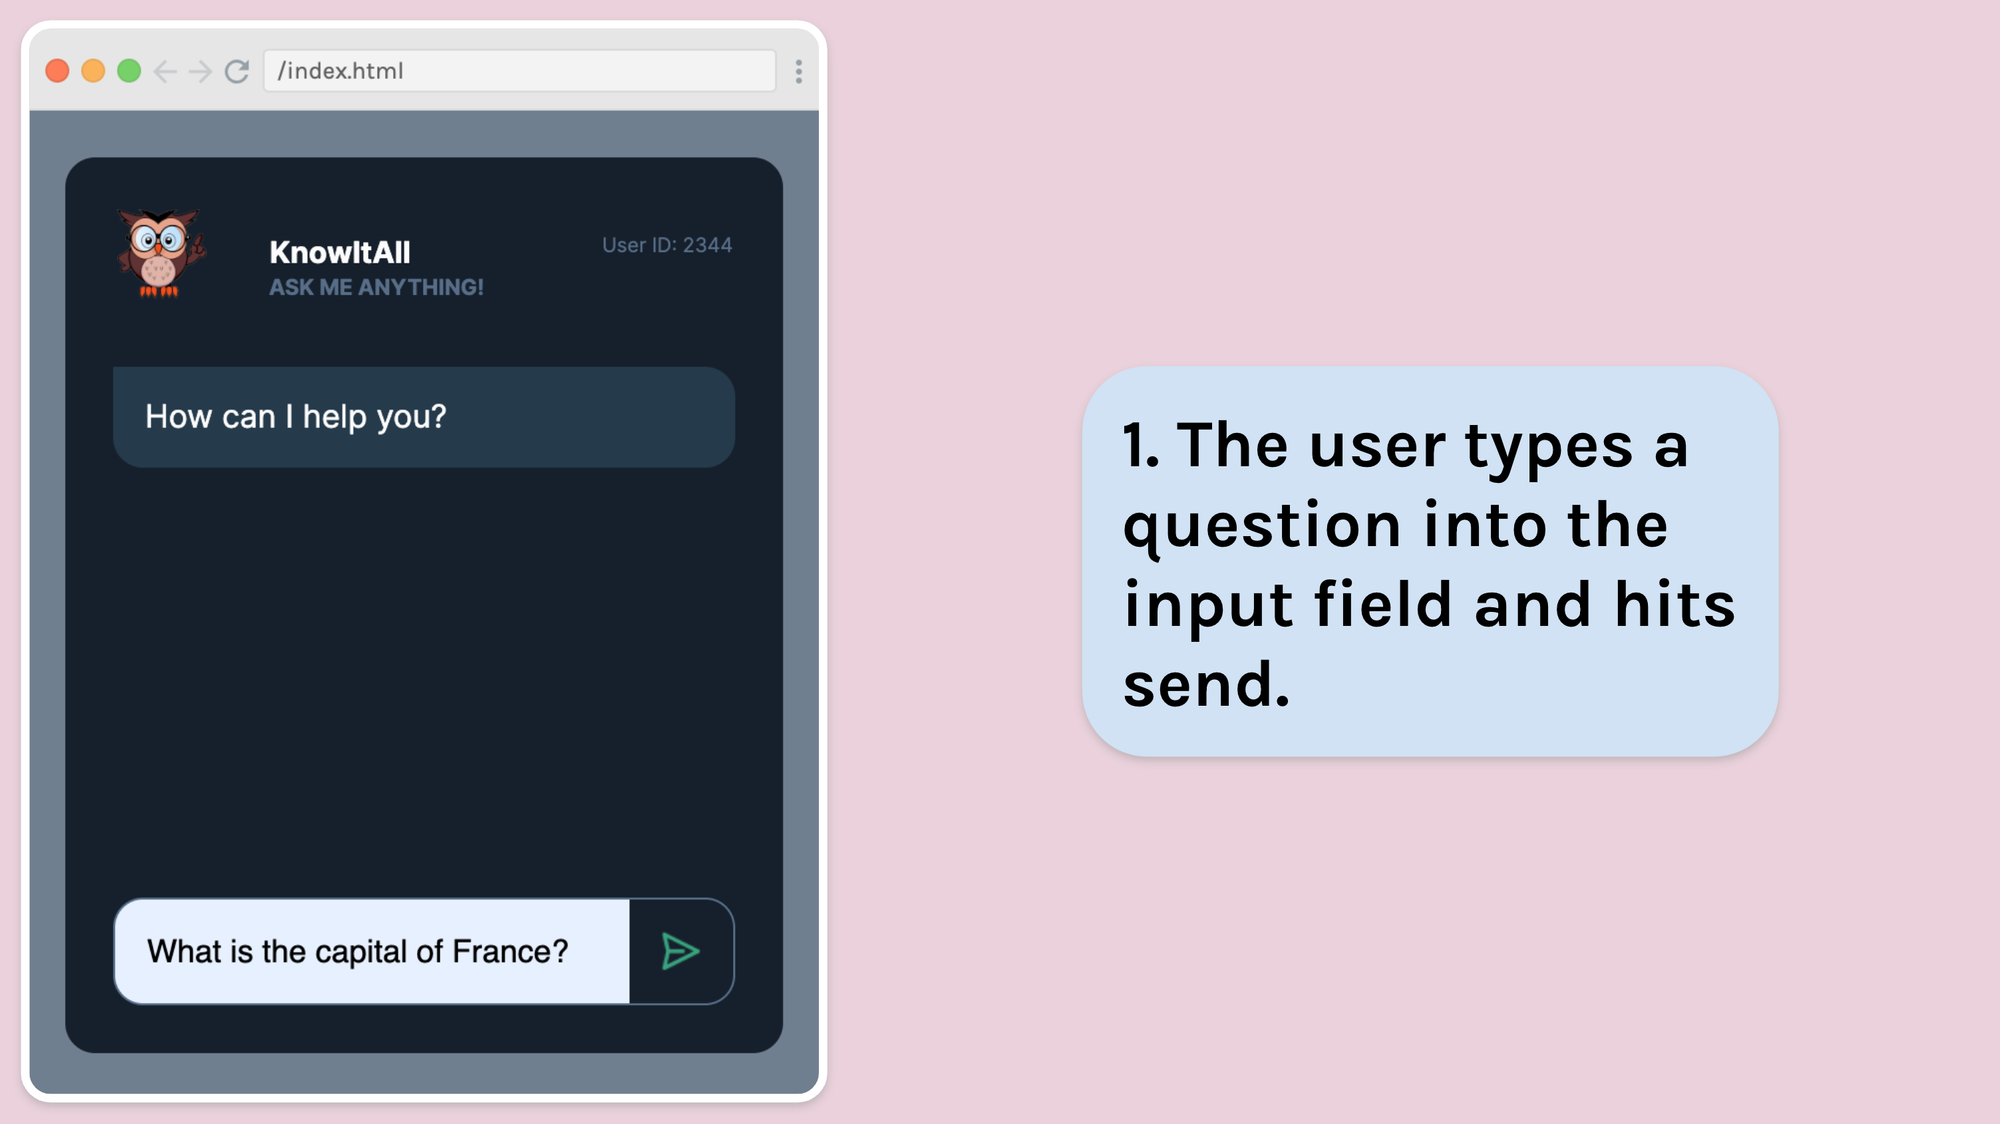 1. The user types a question into the input field and hits send.